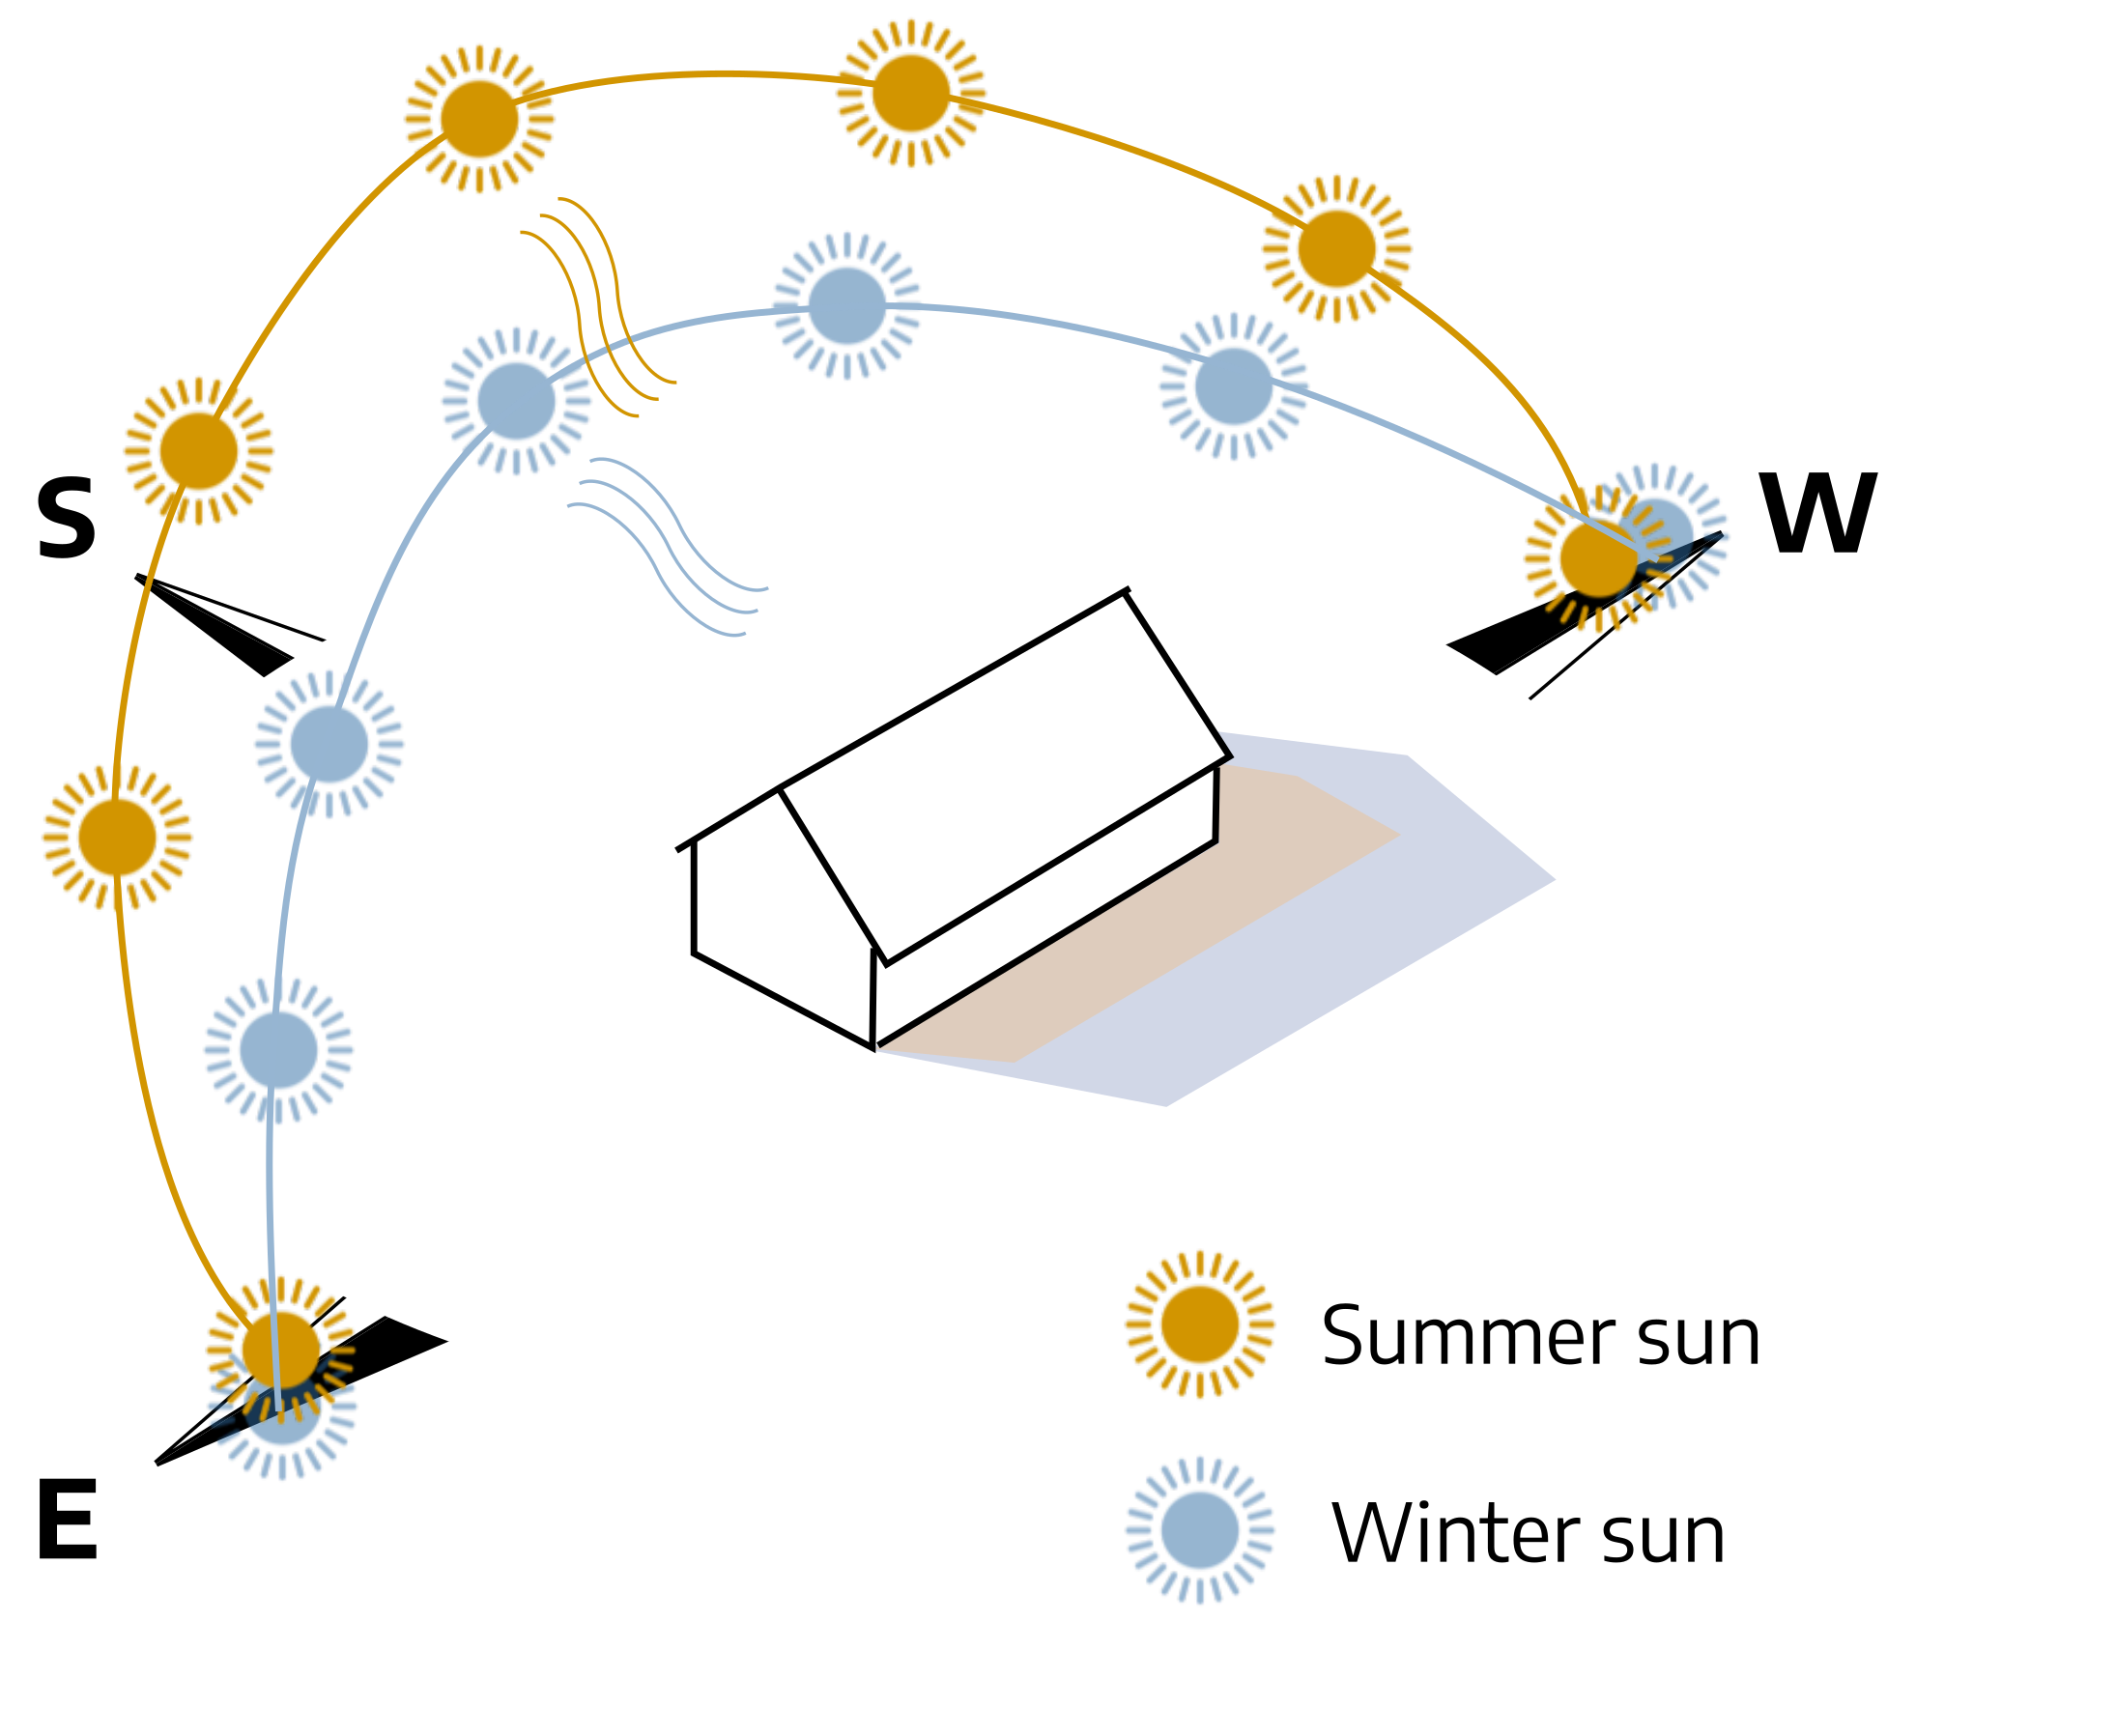 A diagram. A house is drawn in the center with a blue shadow shown larger behind the house, it also has an orange smaller shadow behind the house. At the top end of the house is West, the bottom of the house is East, the lower left side is South. On the left side, from East to West is a shallow curve with a blue sun drawing, "winter sun." On the left side from East to West is a larger curve with a orange drawing, "summer sun."